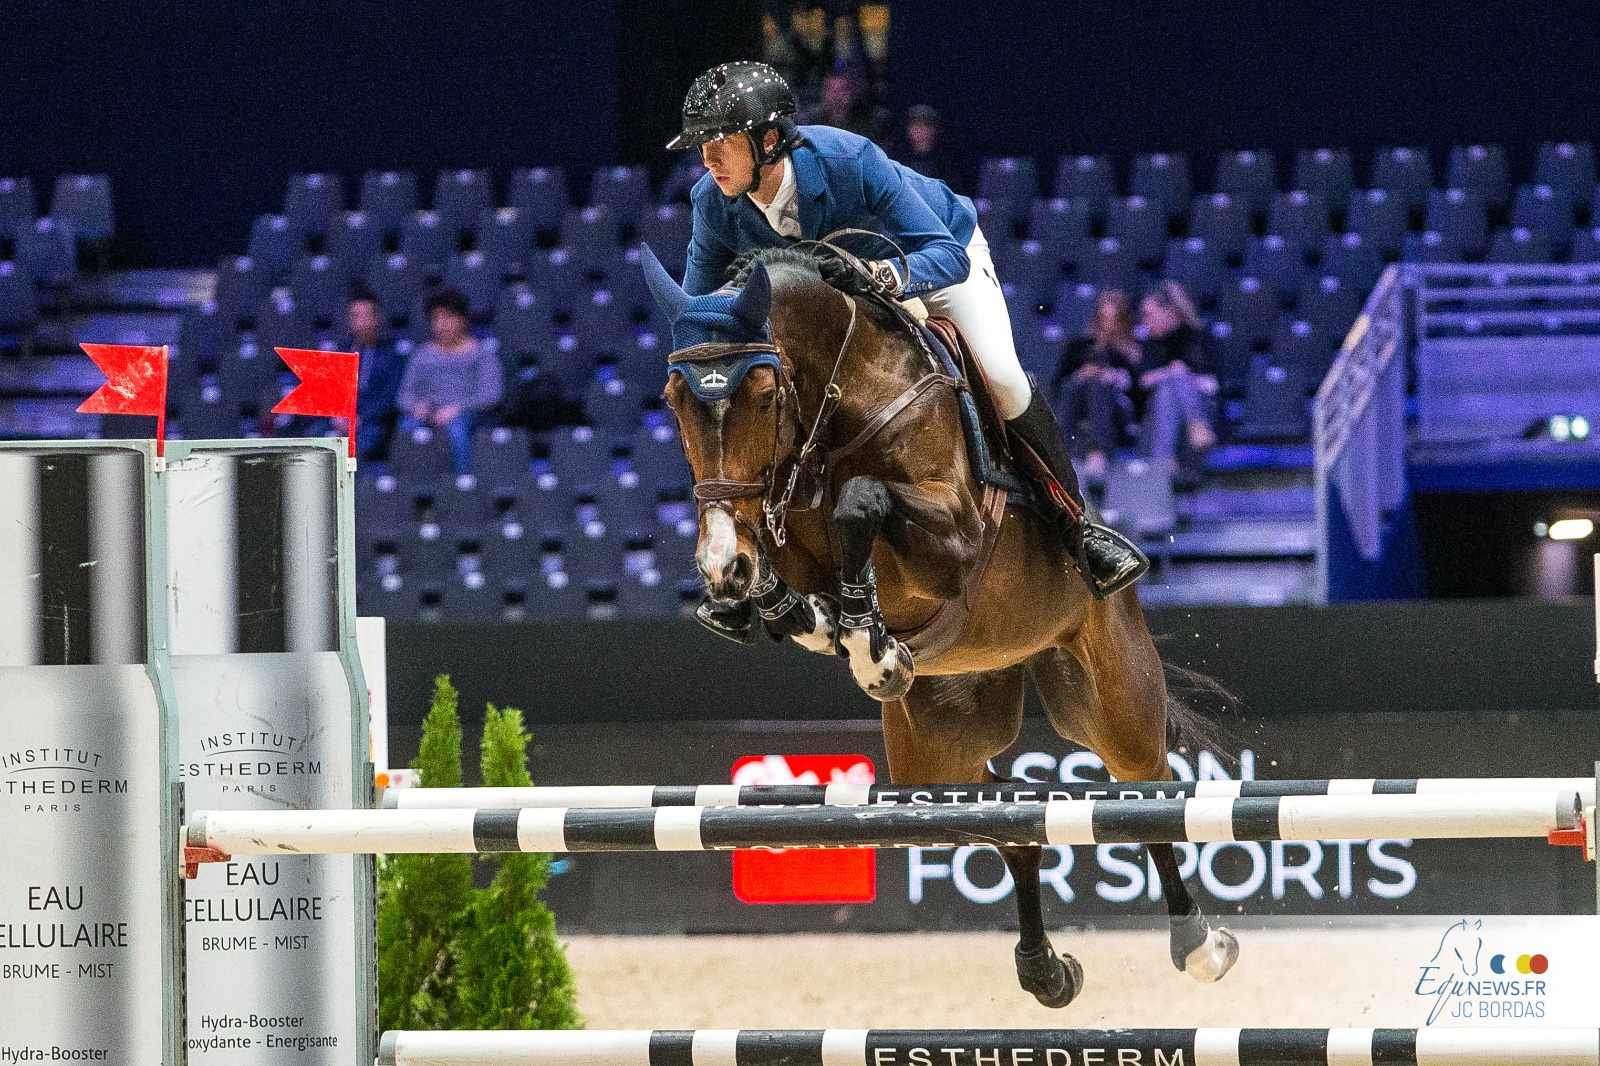 Martin Fuchs has an impressive win with ‘Bastille’, in the Royal Bliss Trophy